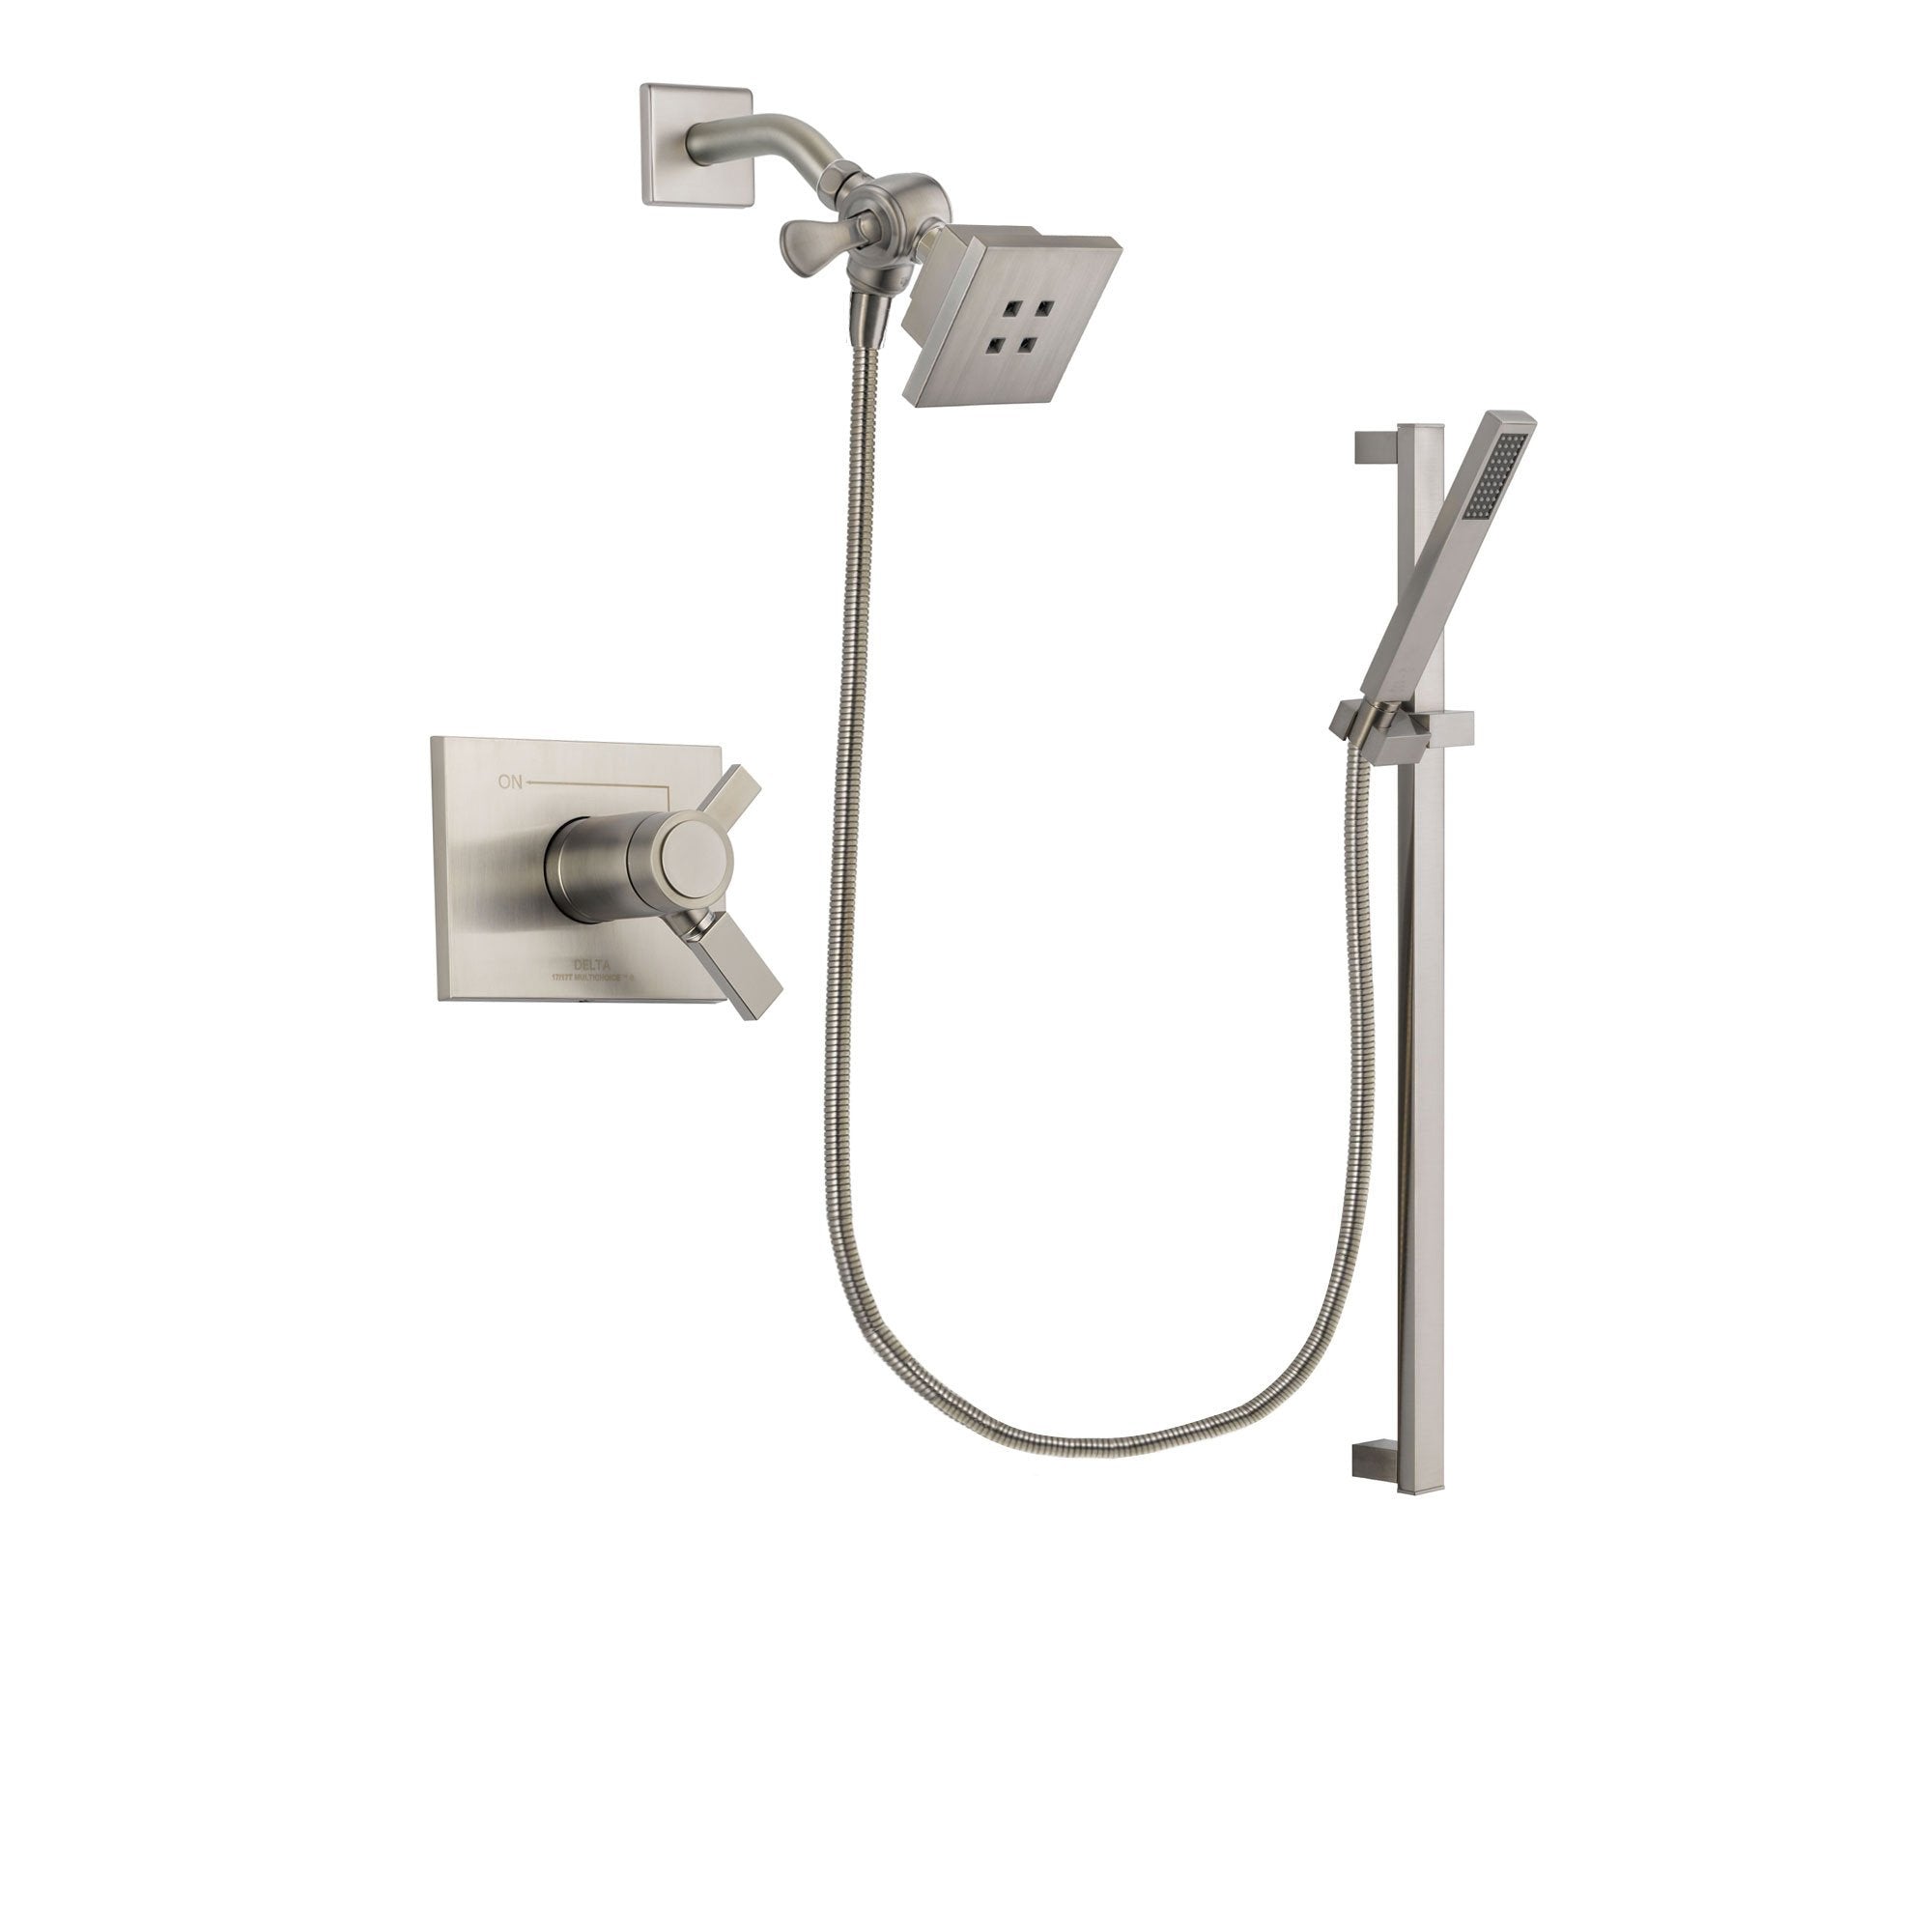 Delta Vero Stainless Steel Finish Thermostatic Shower Faucet System Package with Square Showerhead and Modern Personal Hand Shower with Slide Bar Includes Rough-in Valve DSP2330V